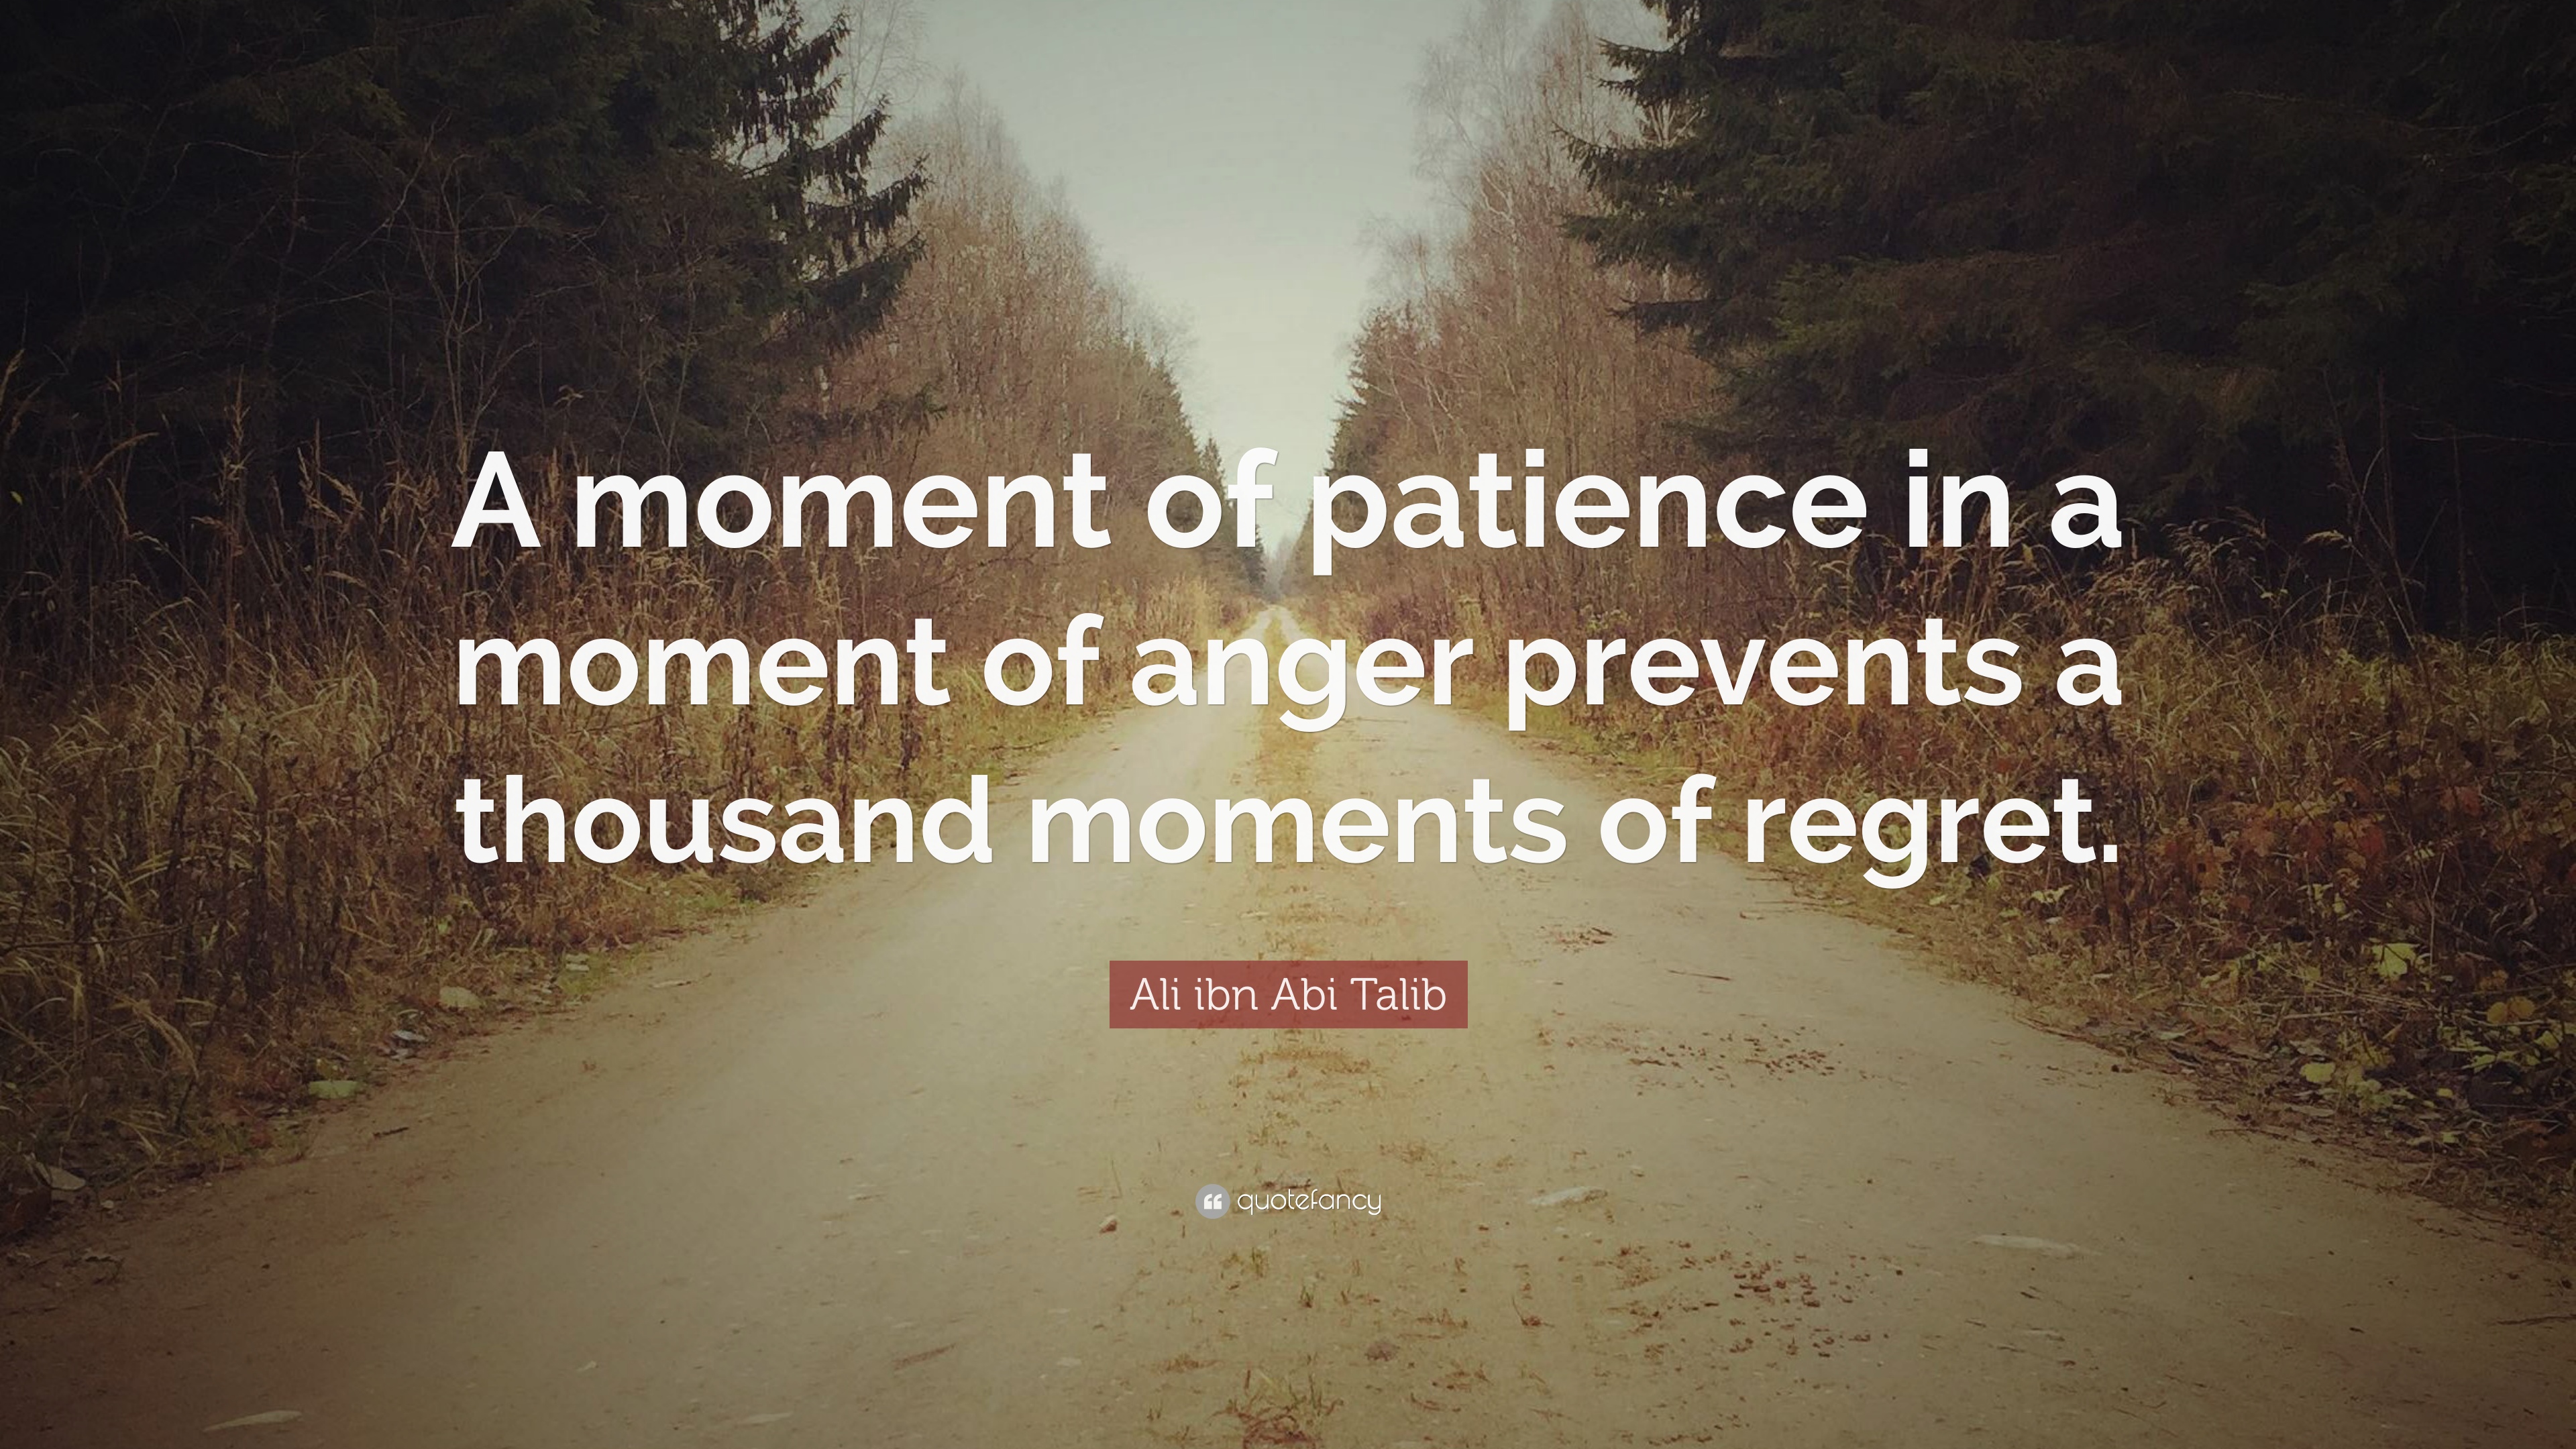 Ali ibn Abi Talib Quote: “A moment of patience in a moment of anger ...